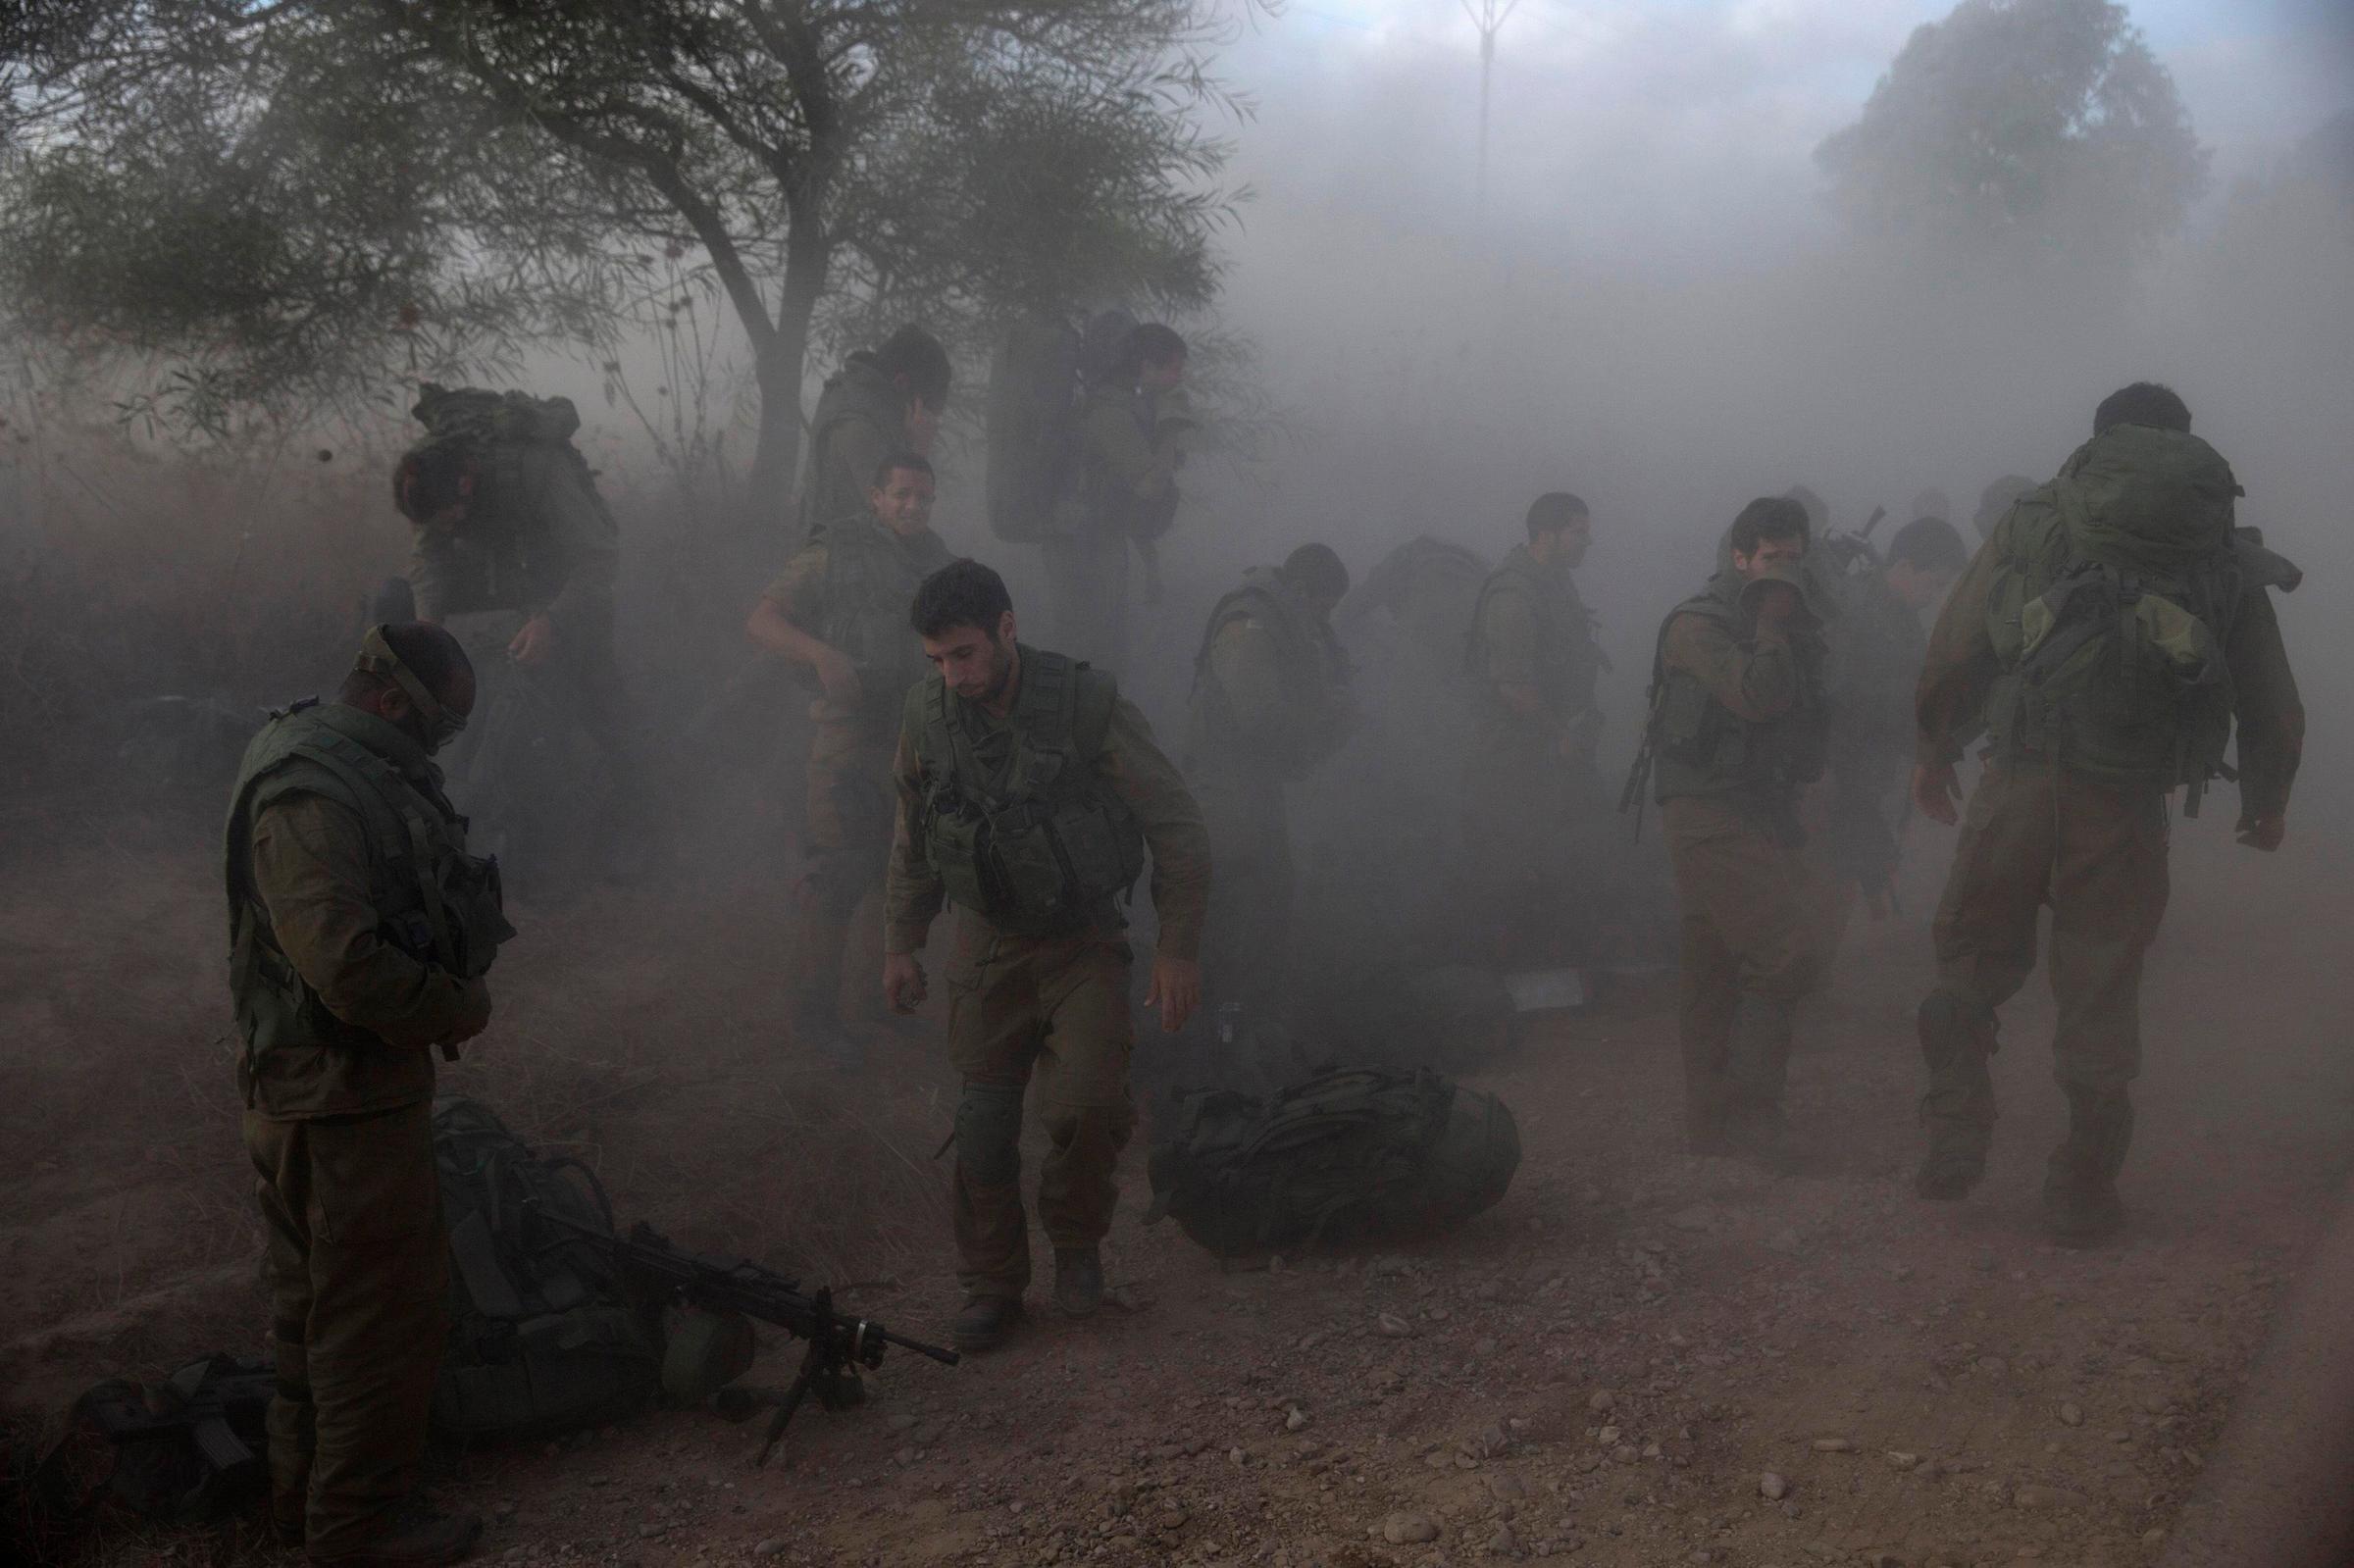 Israeli soldiers put on their gear on the side of a road across from the Gaza Strip on July 18, 2014.